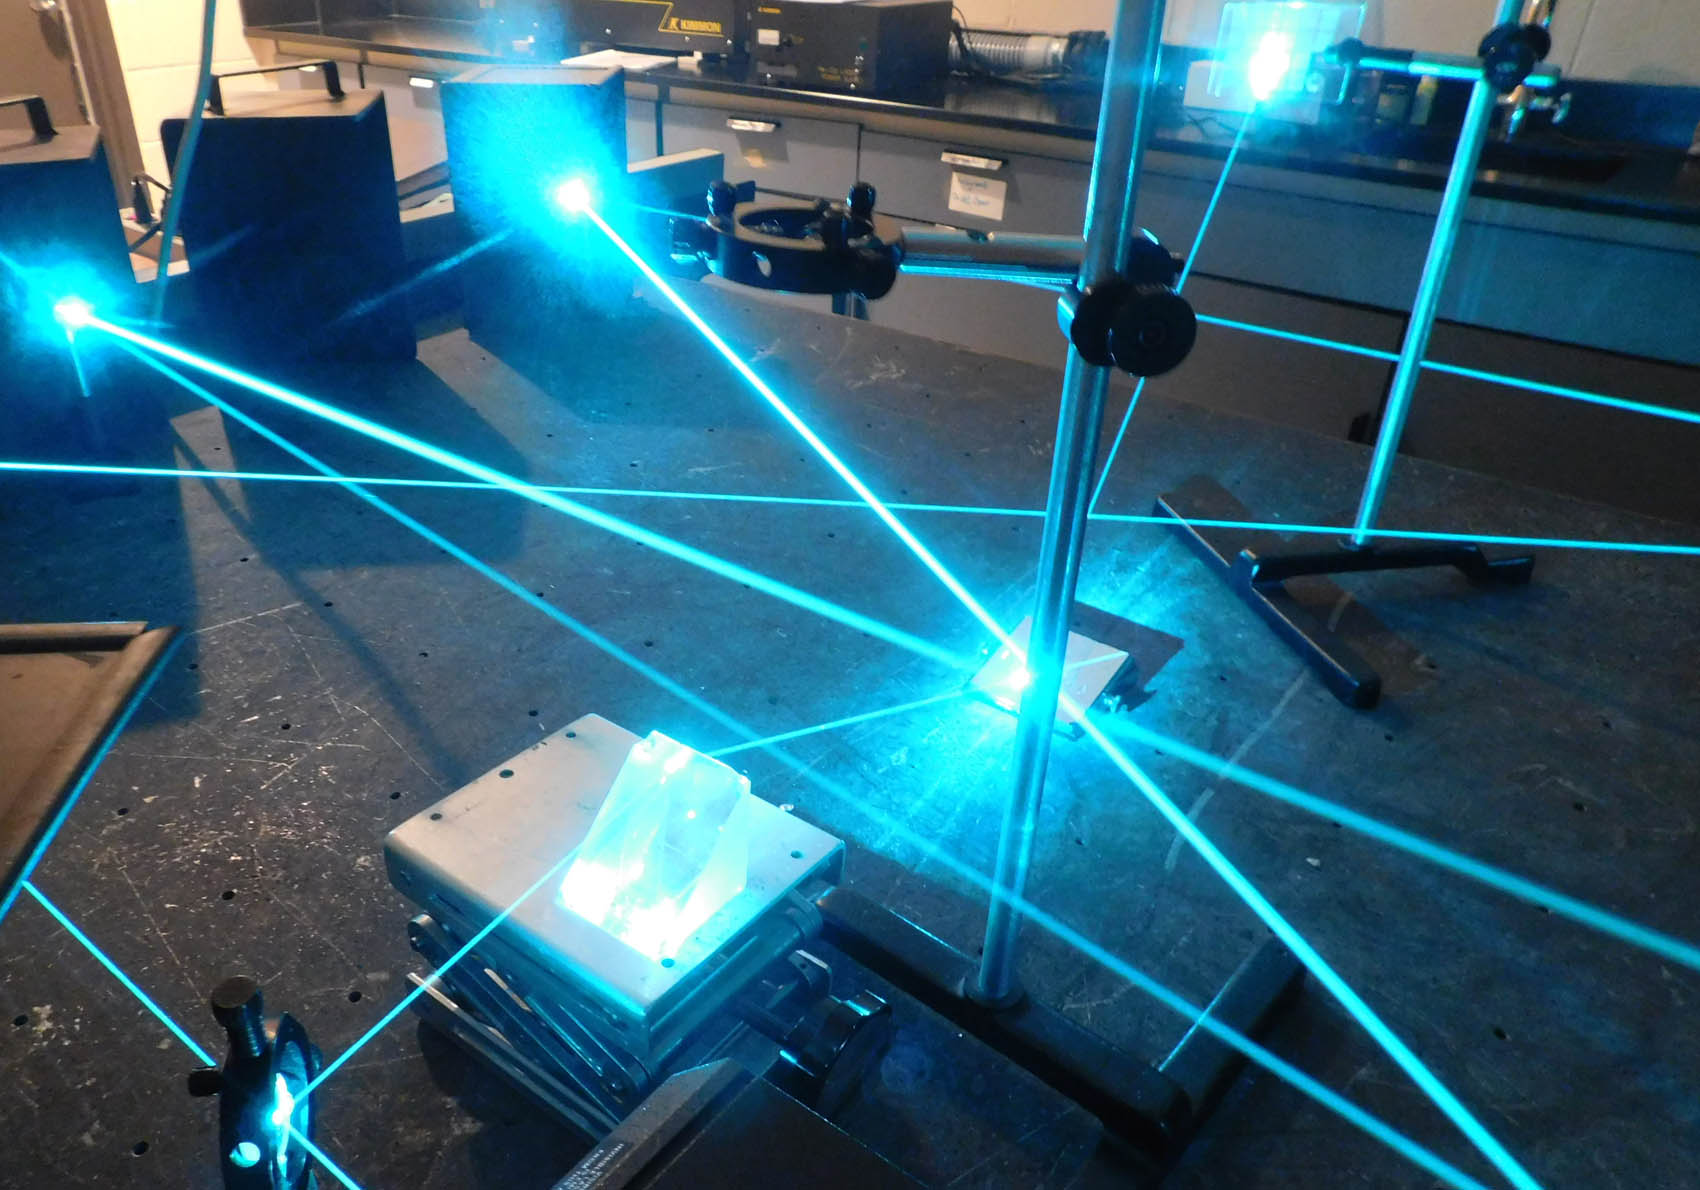 Read the full story, Day of Photonics will be observed on CCCC Harnett Main Campus